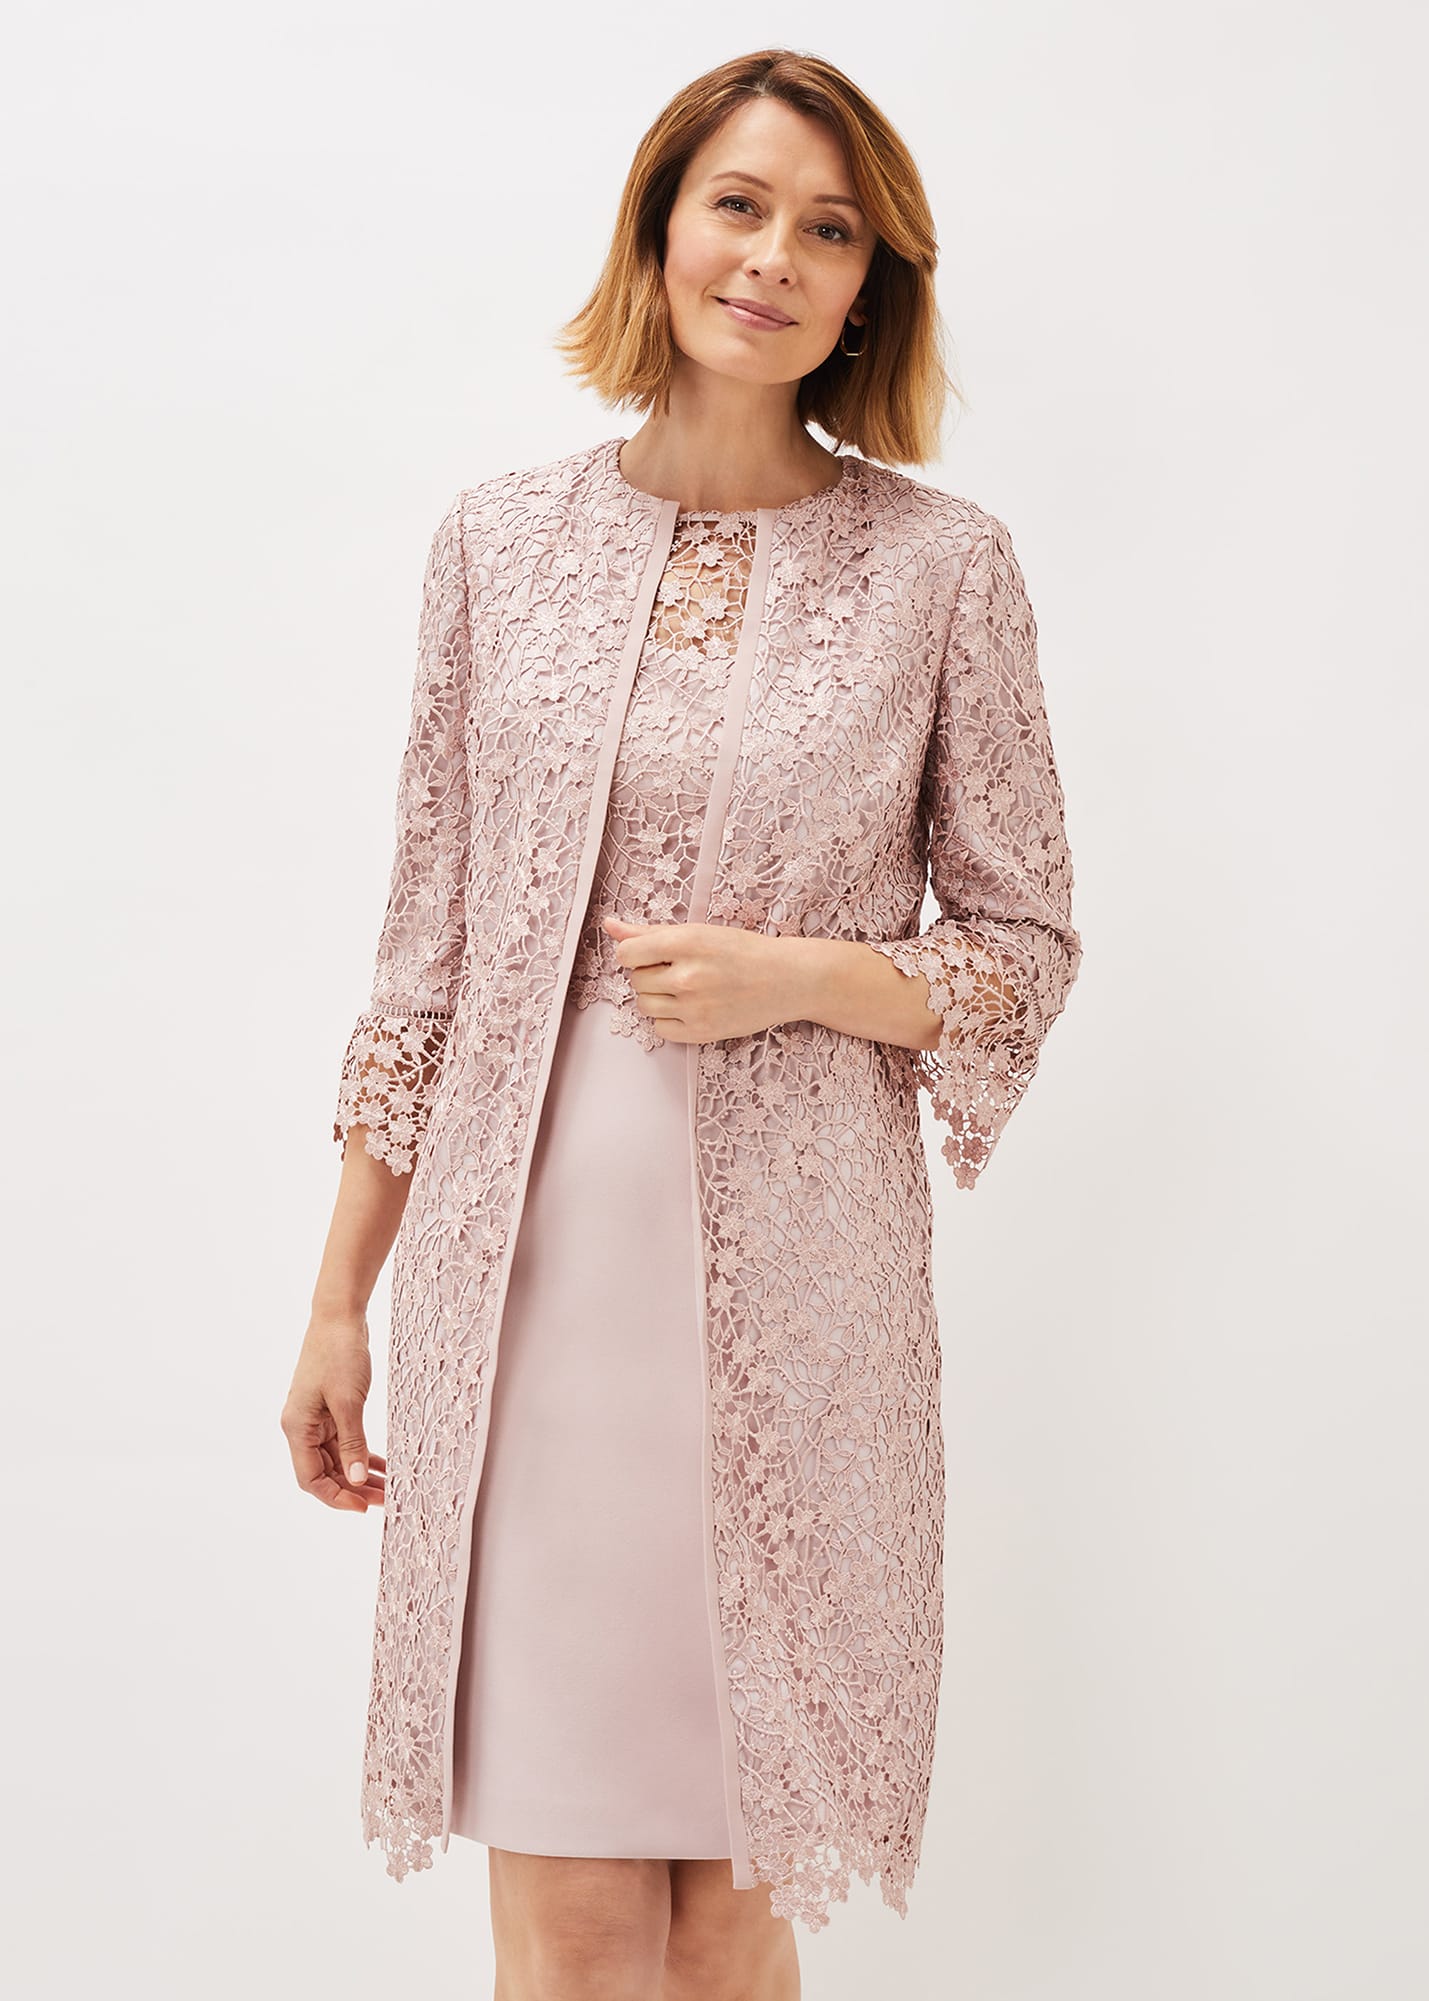 Phase Eight Women's Mariposa Lace Occasion Coat